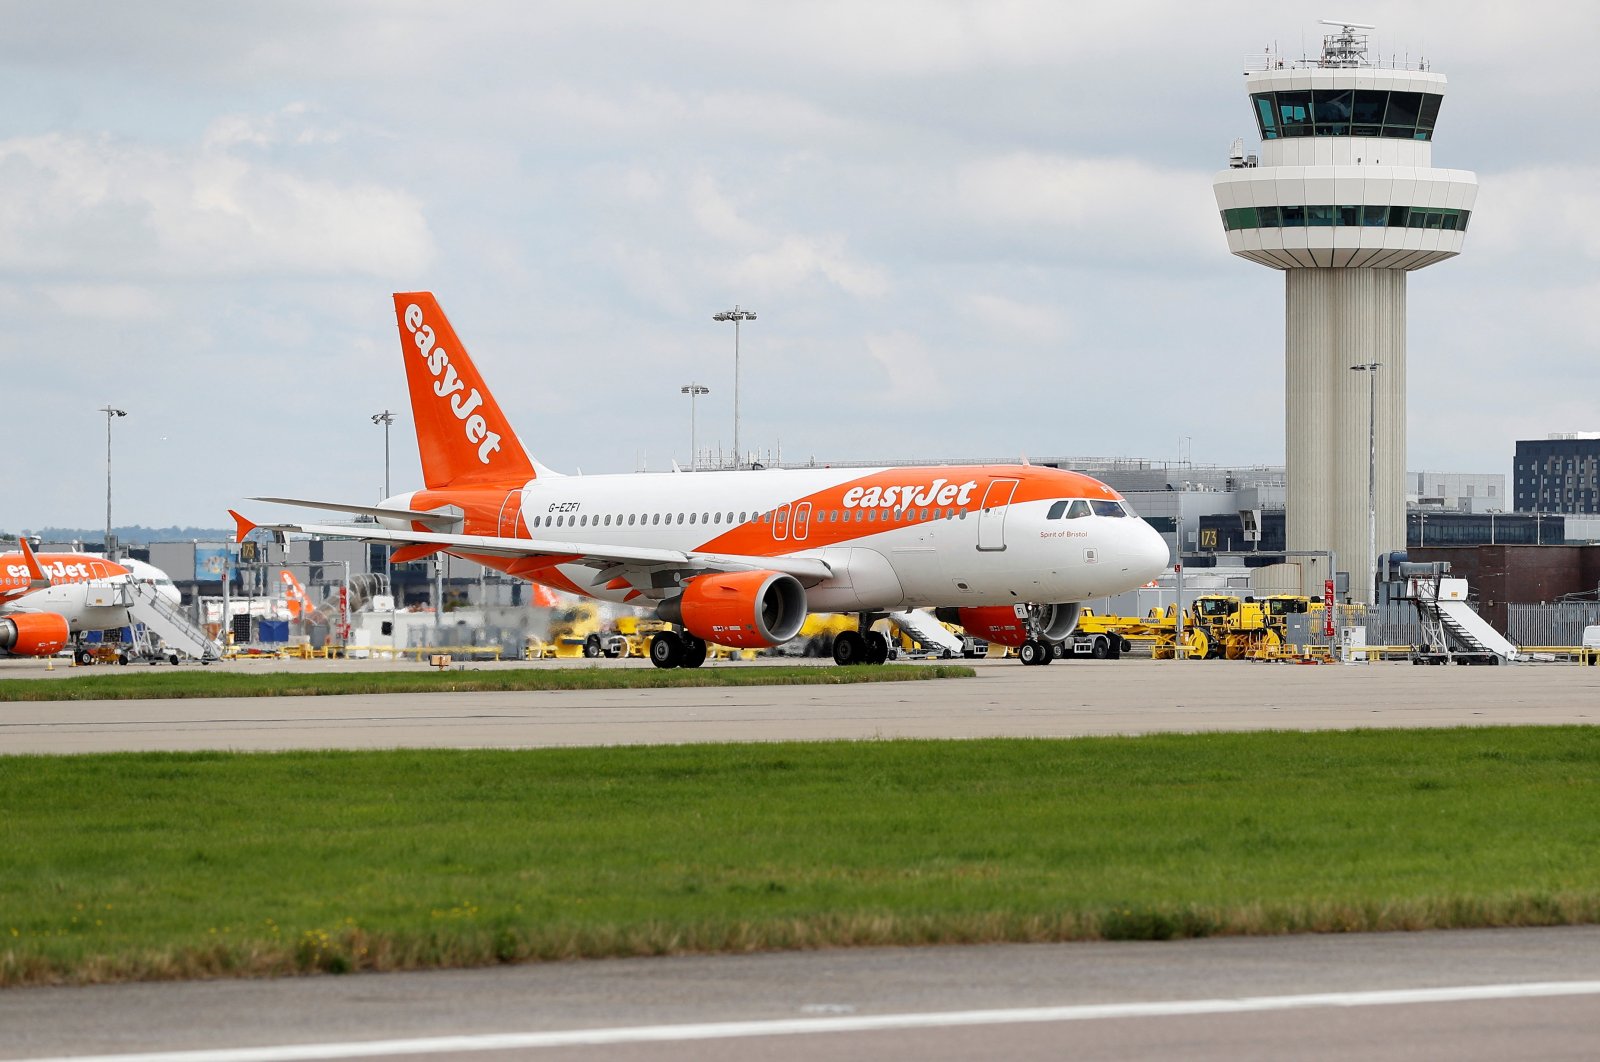 An easyJet Airbus plane taxis close to the northern runway at Gatwick Airport in Crawley, Britain, Aug. 25, 2021. (Reuters Photo)